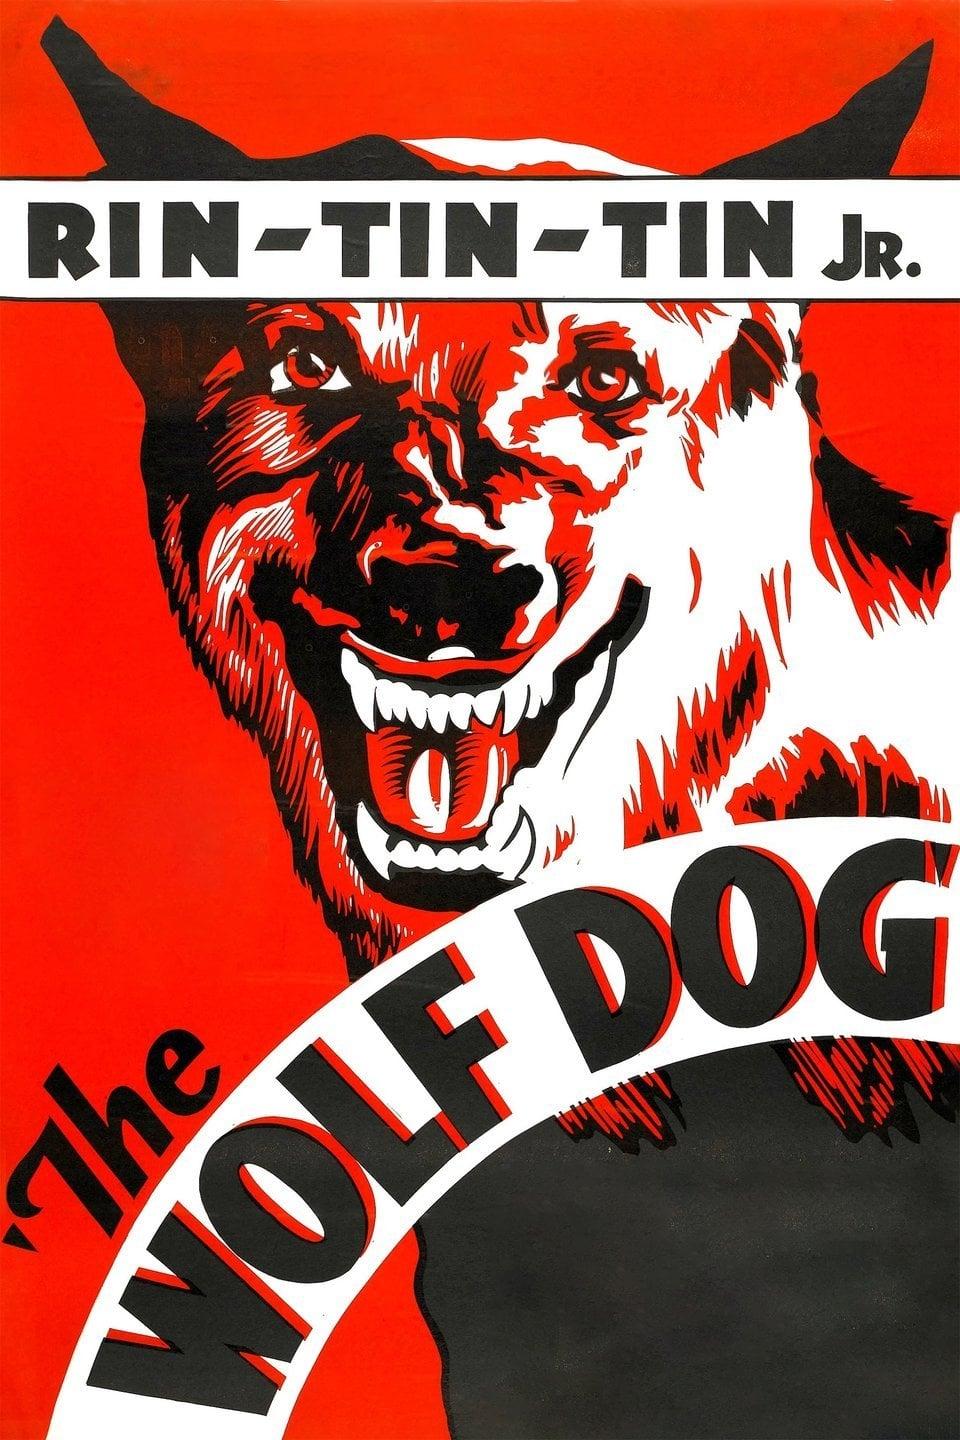 The Wolf Dog poster